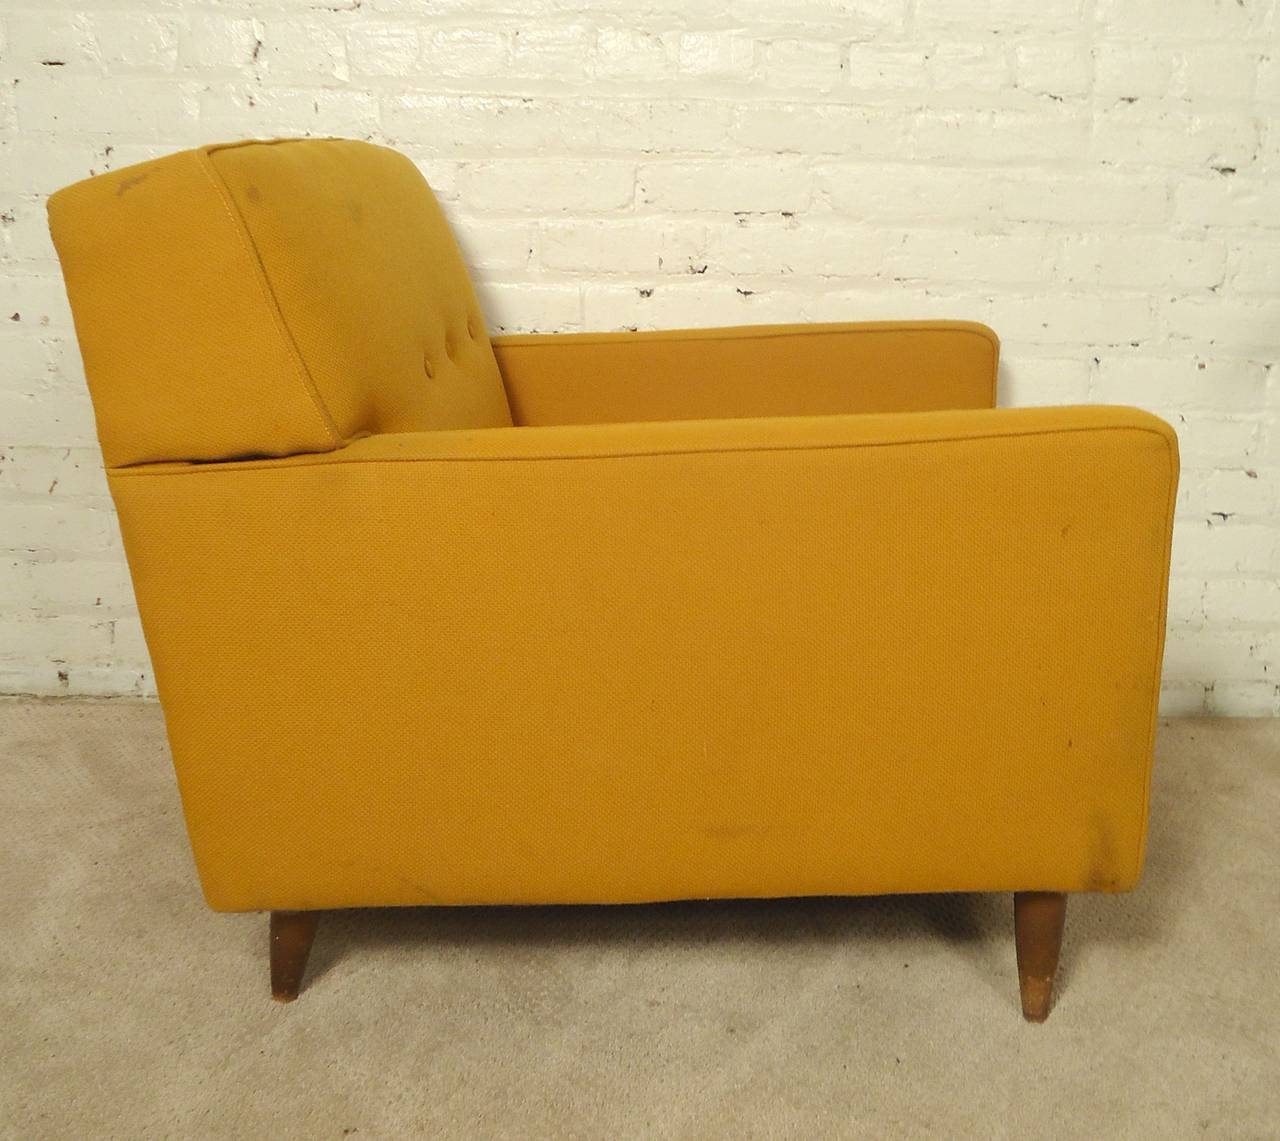 Well formed McCobb style armchair with tapered walnut legs. Deep seat, long arms and tufted back.

(Please confirm item location, NY or NJ, with dealer).